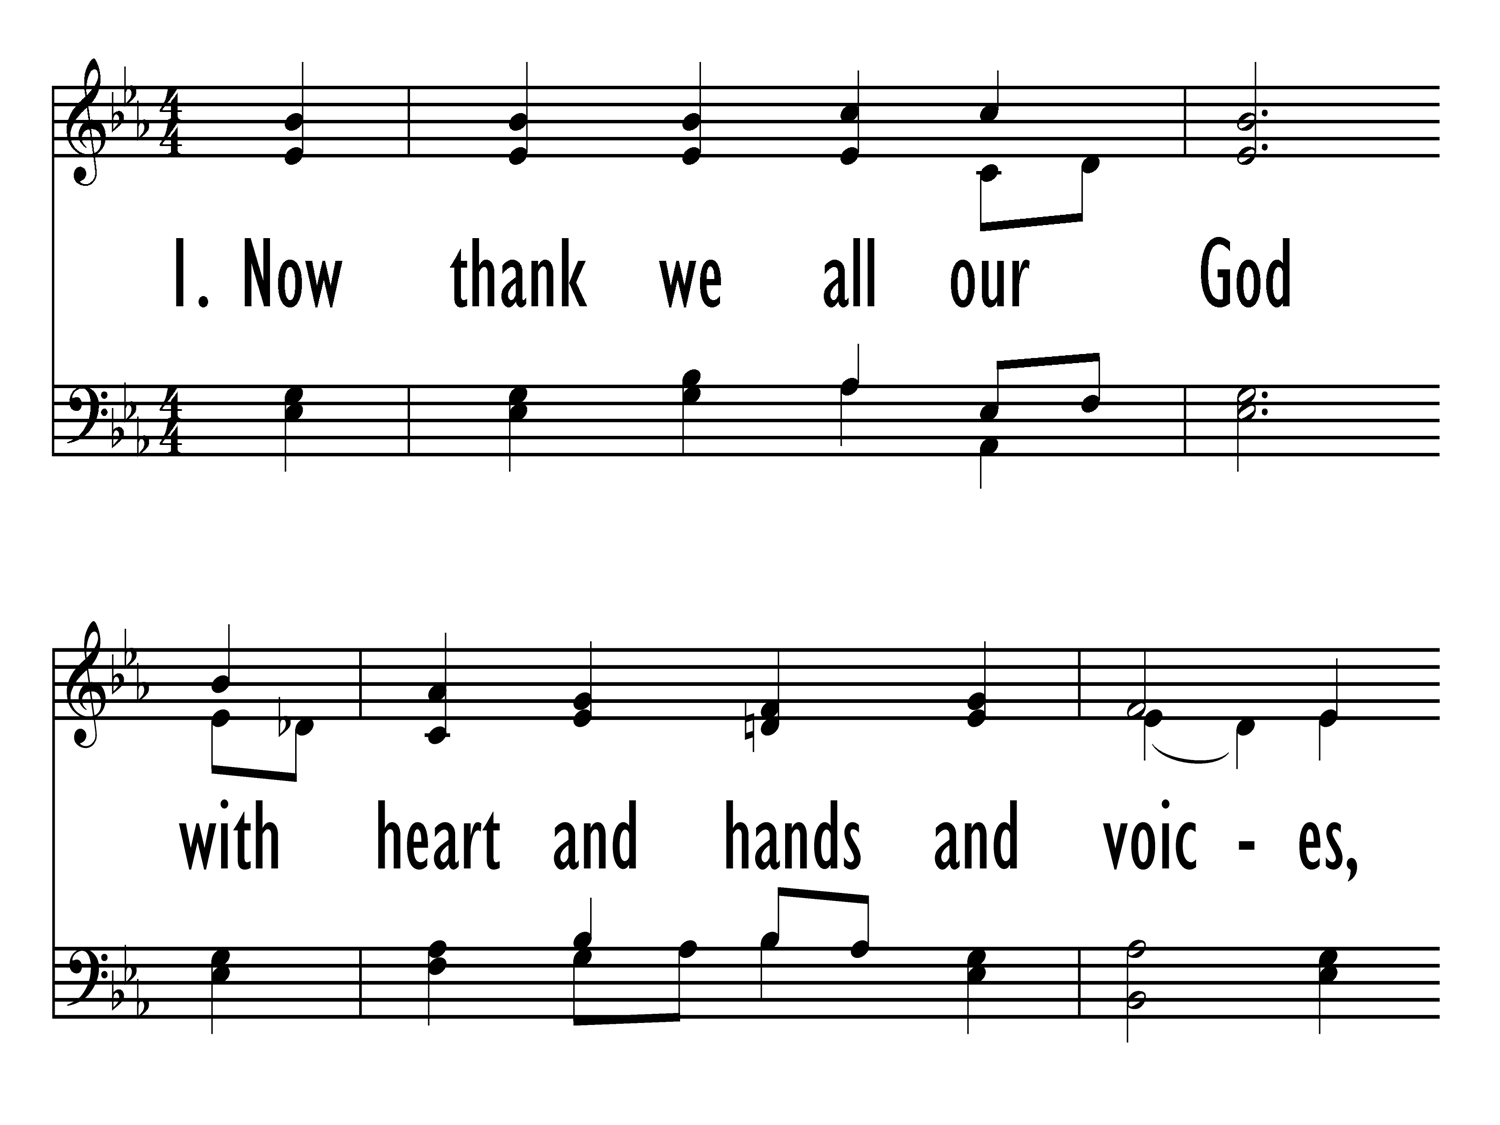 Evangelical Lutheran Worship 839. Now thank we all our God | Hymnary.org